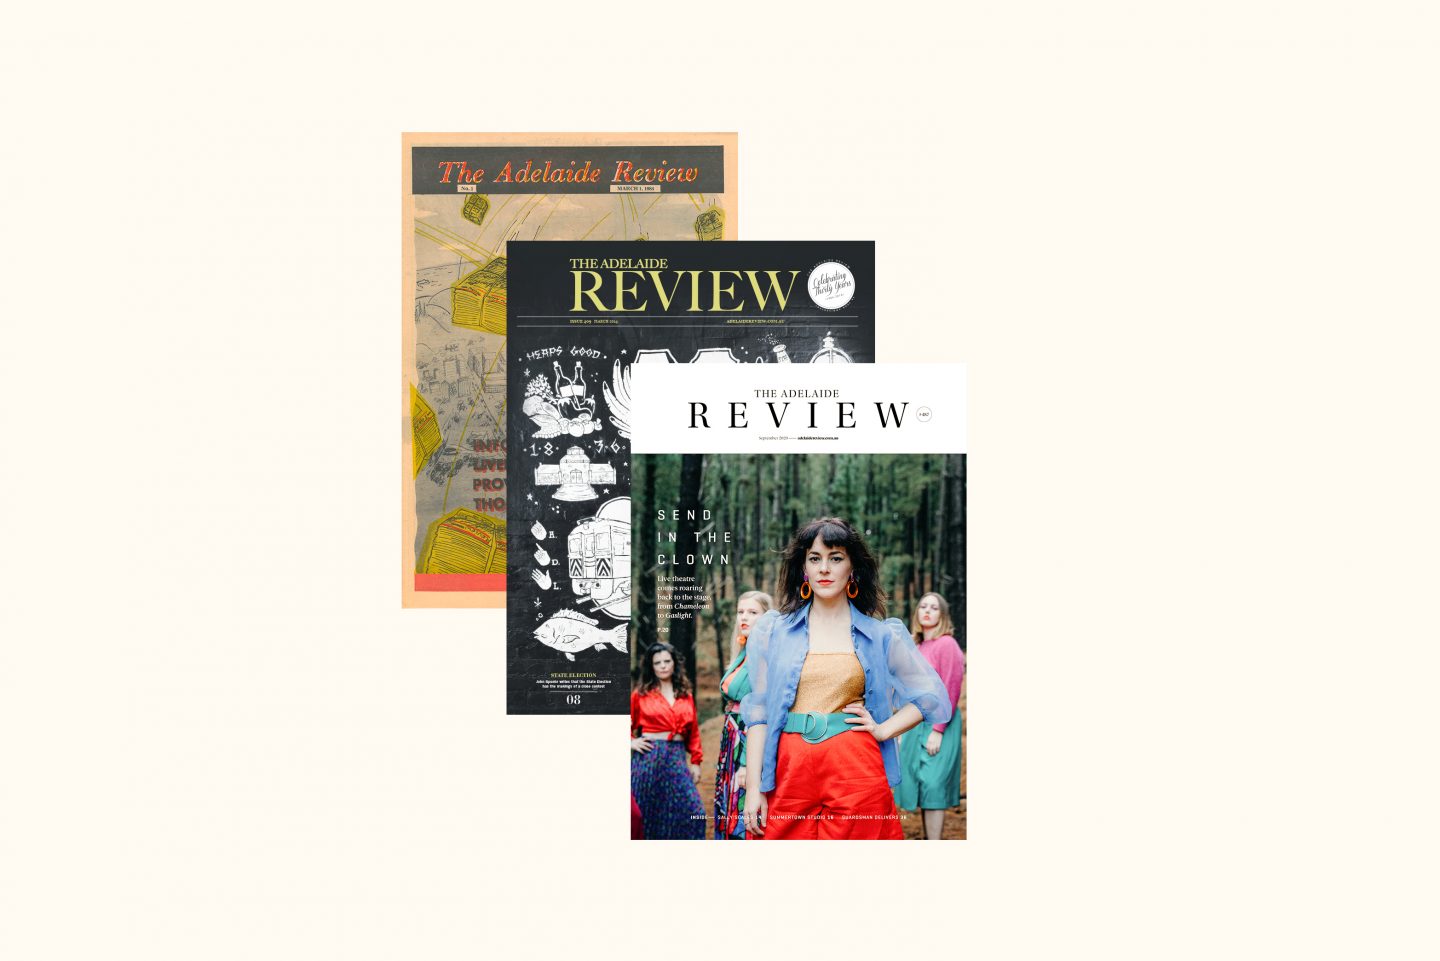 After nearly 37 years The Adelaide Review will publish its final, 488th edition at the end of September.